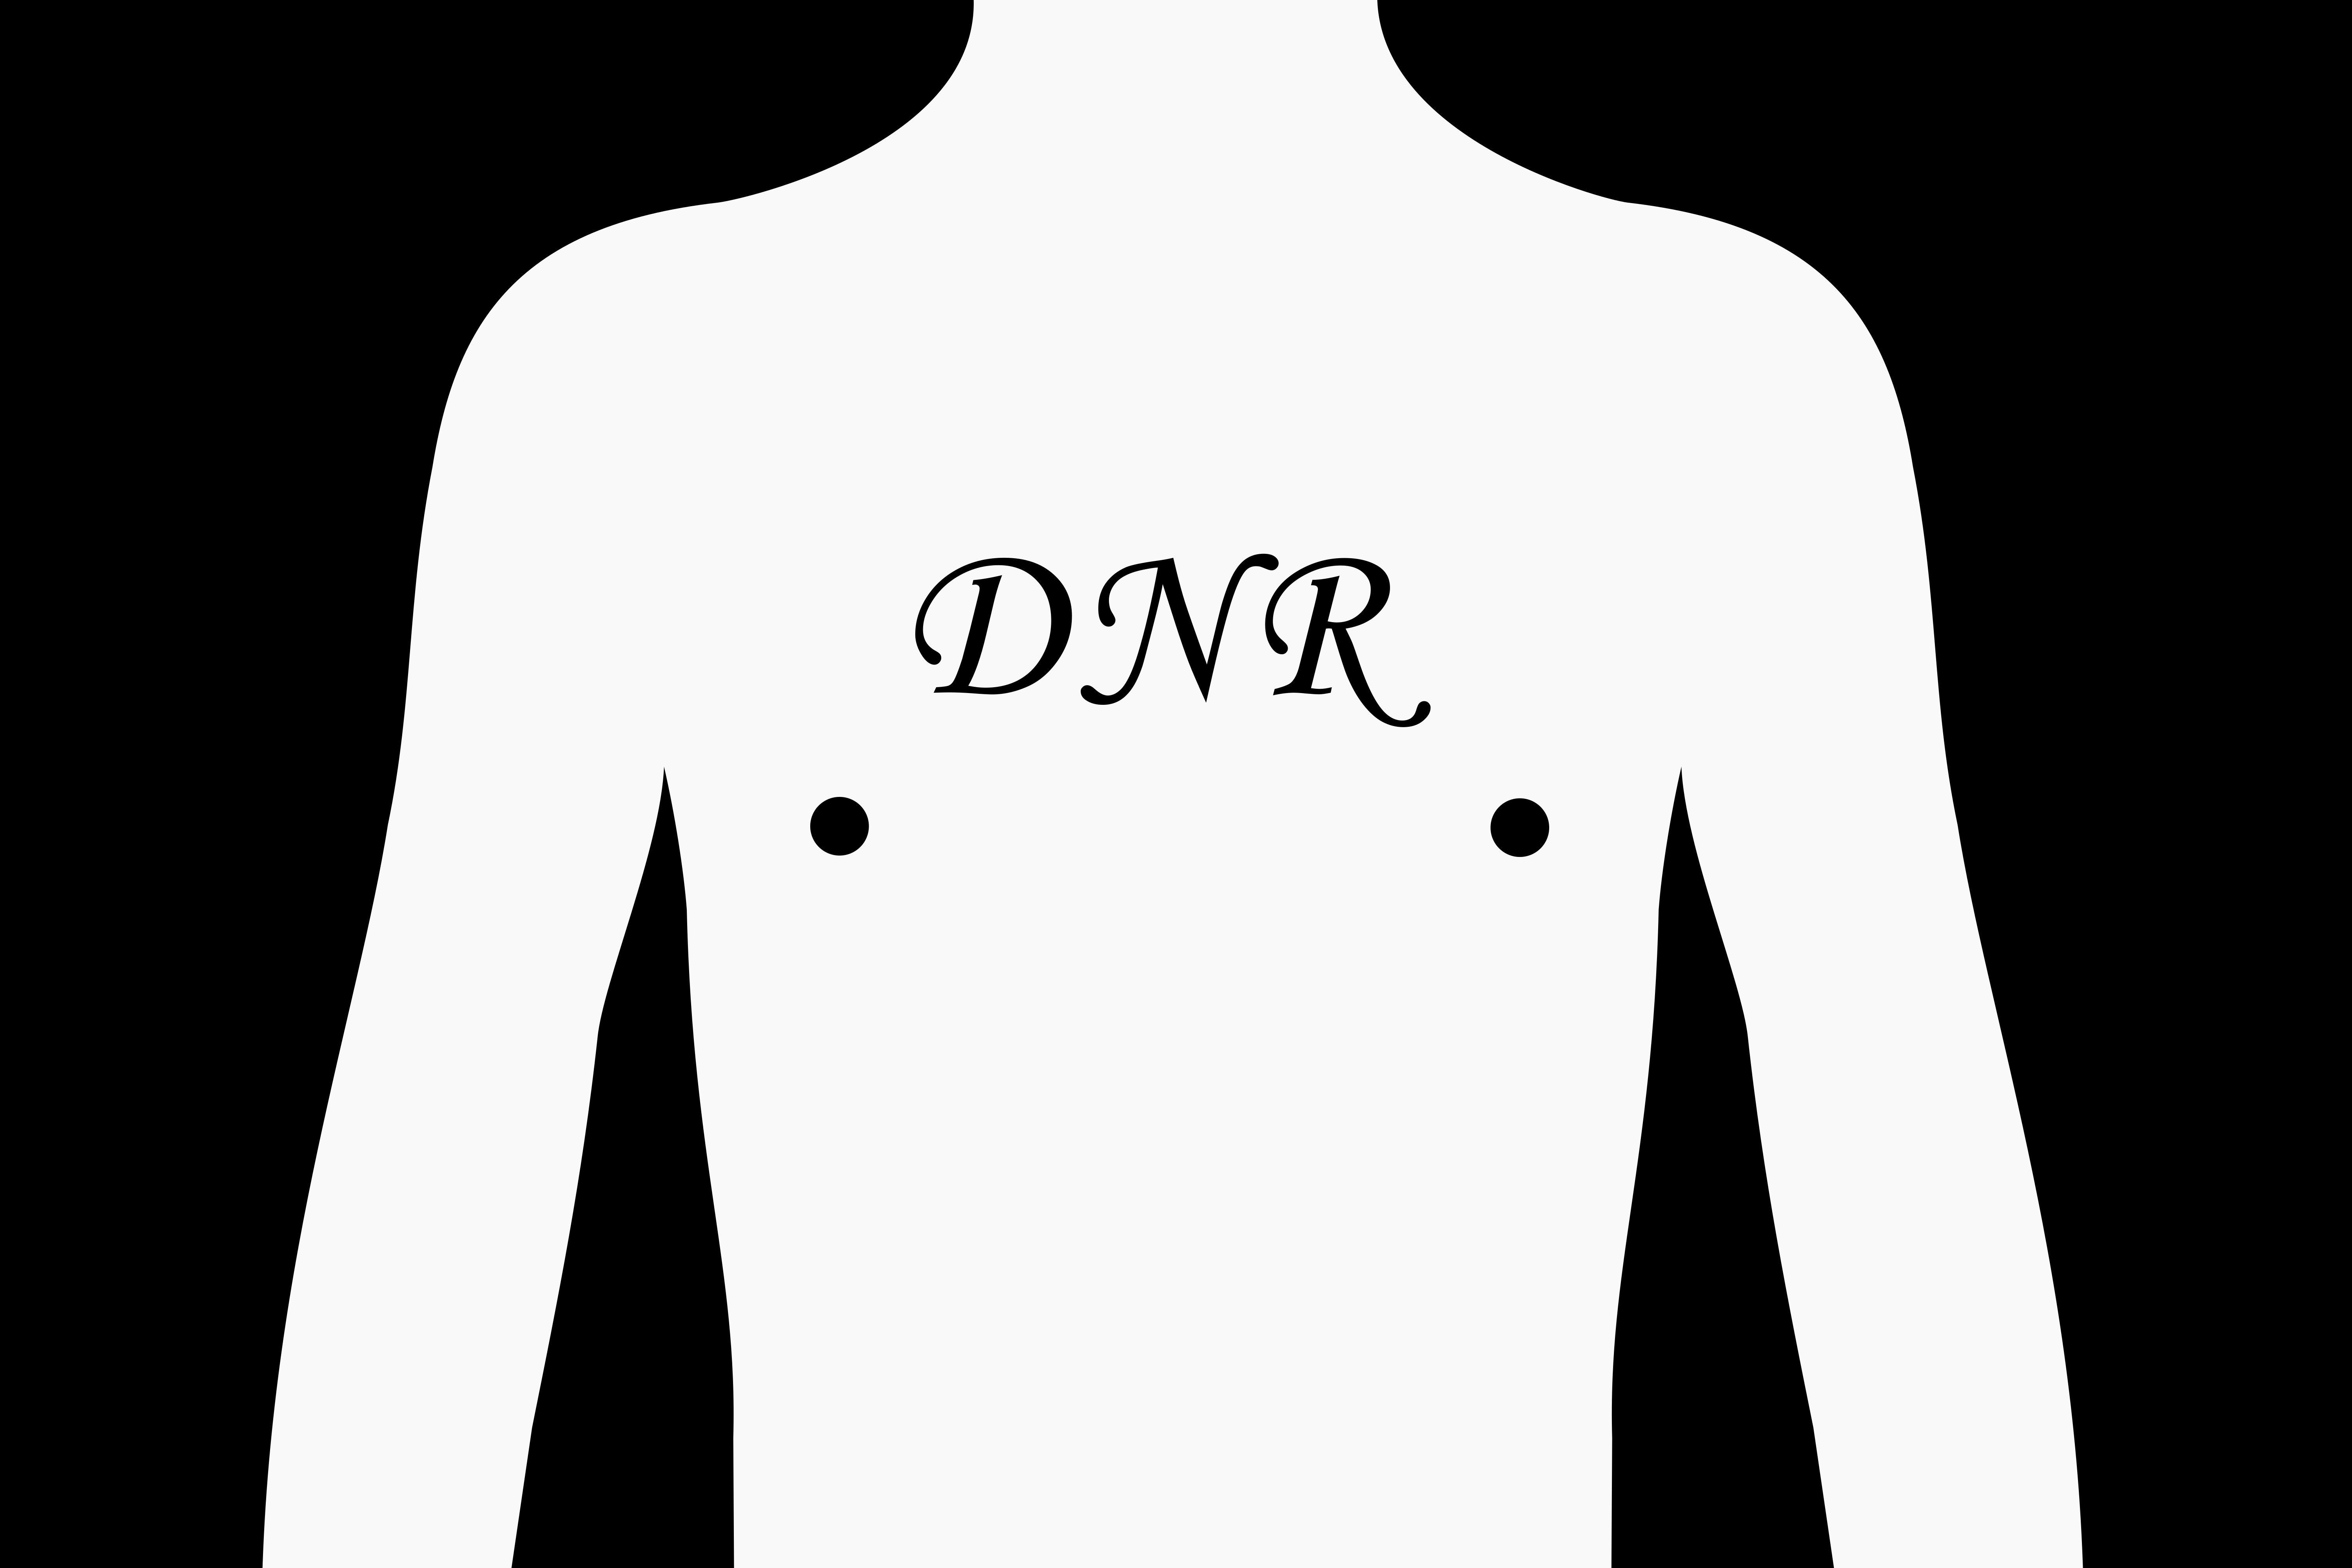 DNR ( Do Not Resuscitate ) text on the body of patient